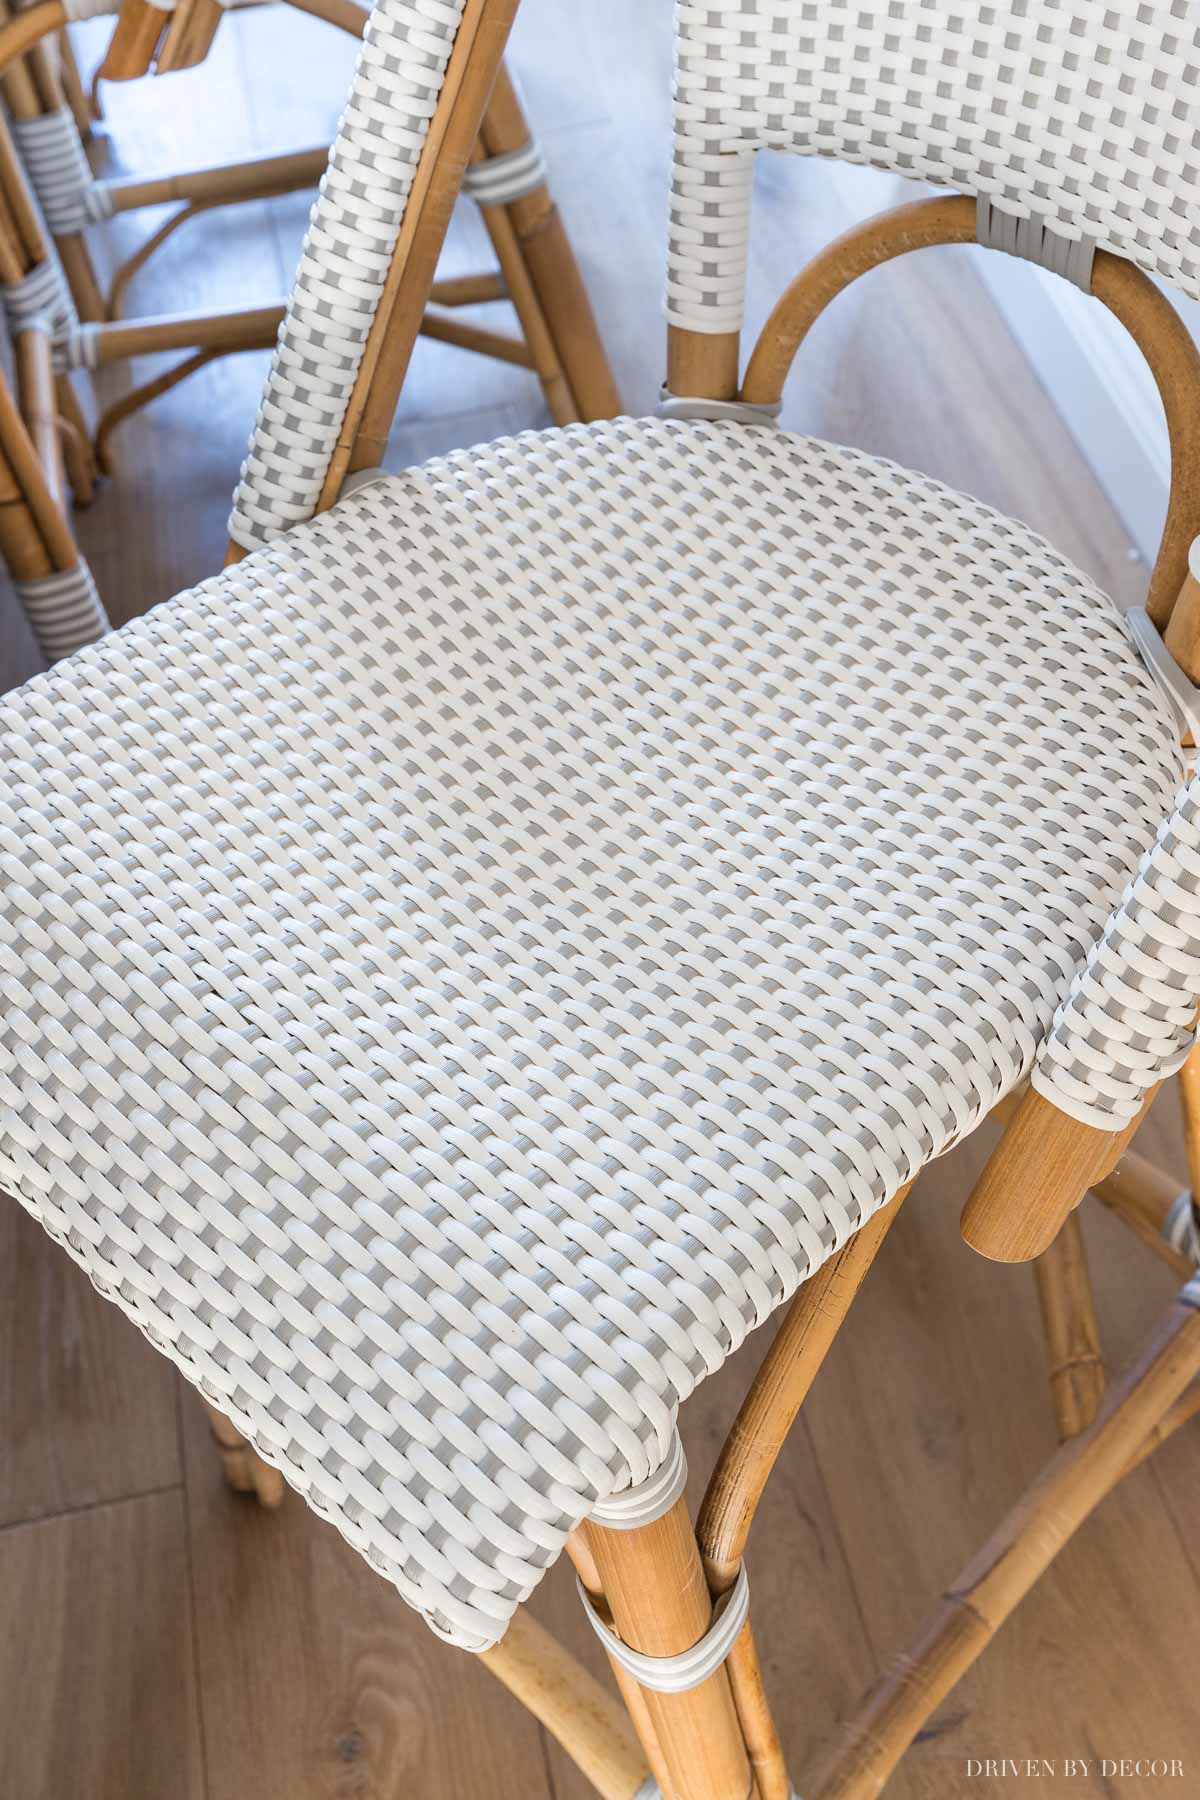 The seats of our counter stools - it's a plastic weave which makes them easy to clean and kid friendly!